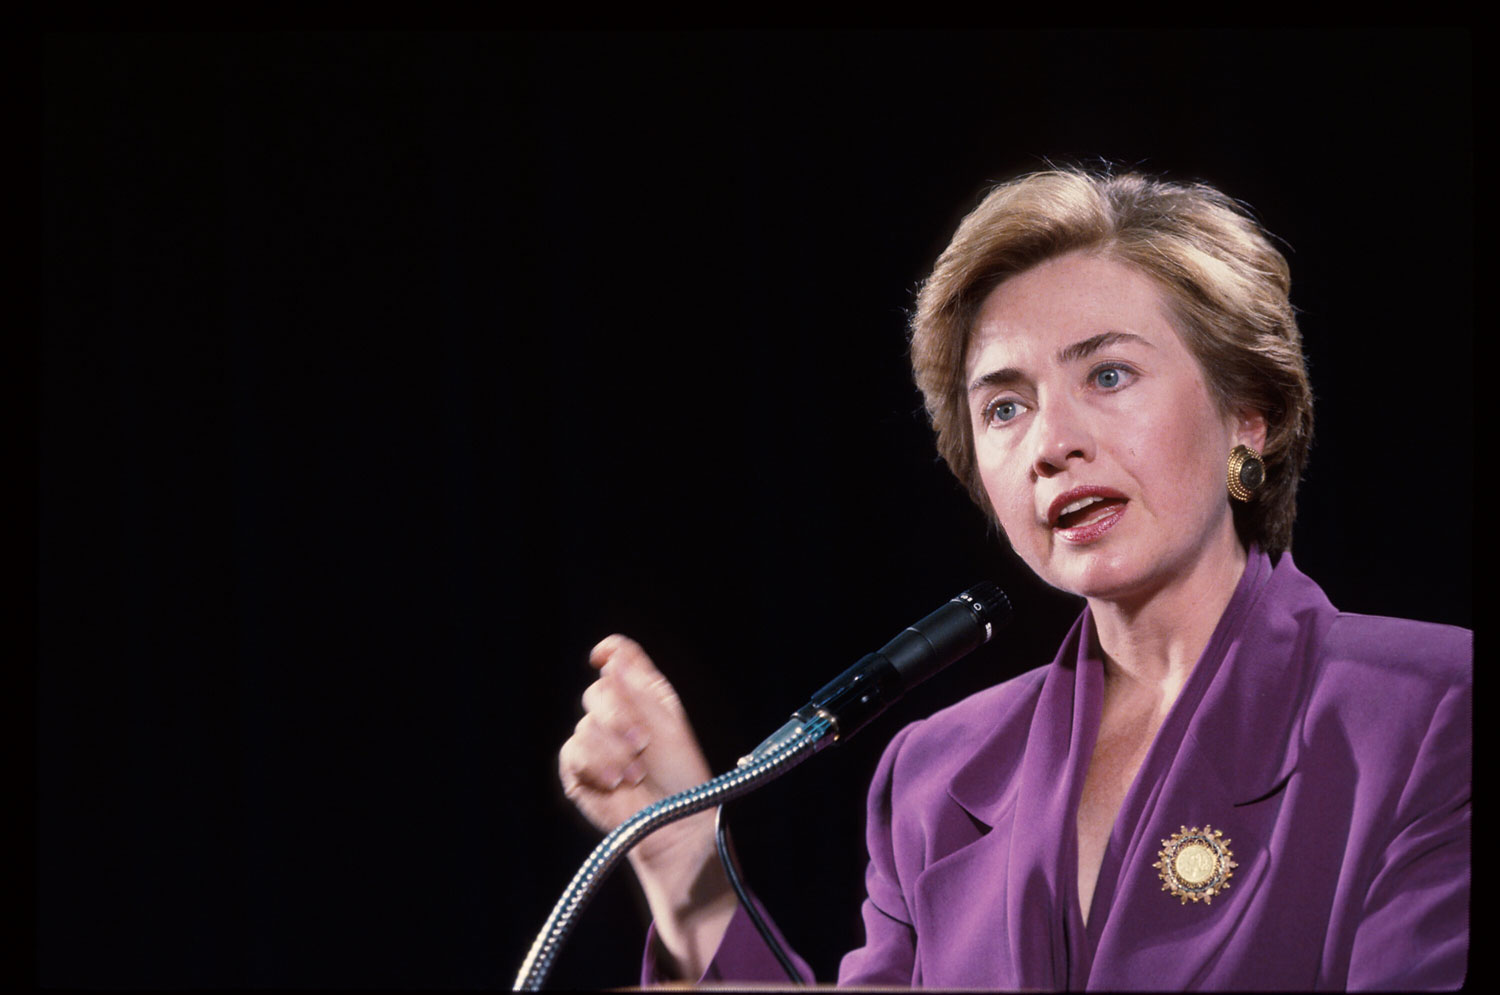 Then First Lady Hillary Clinton speaks at George Washington University, Sept. 10, 1993 in Washington, DC. (Diana Walker&mdash;Getty Images)